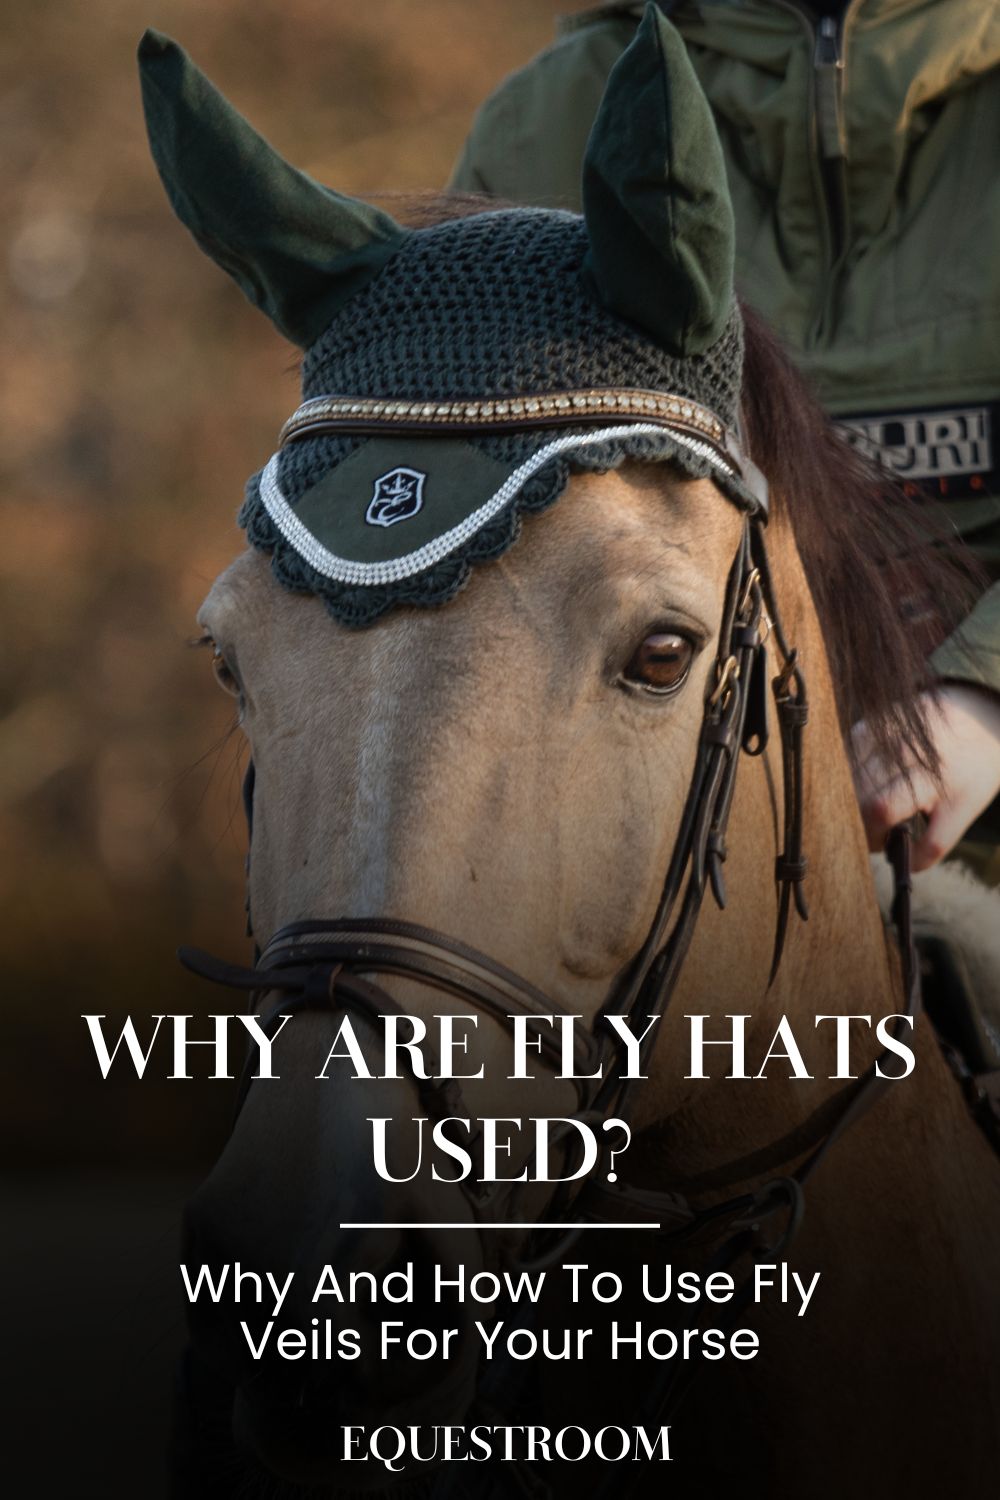 Why Are Fly Hats Used?